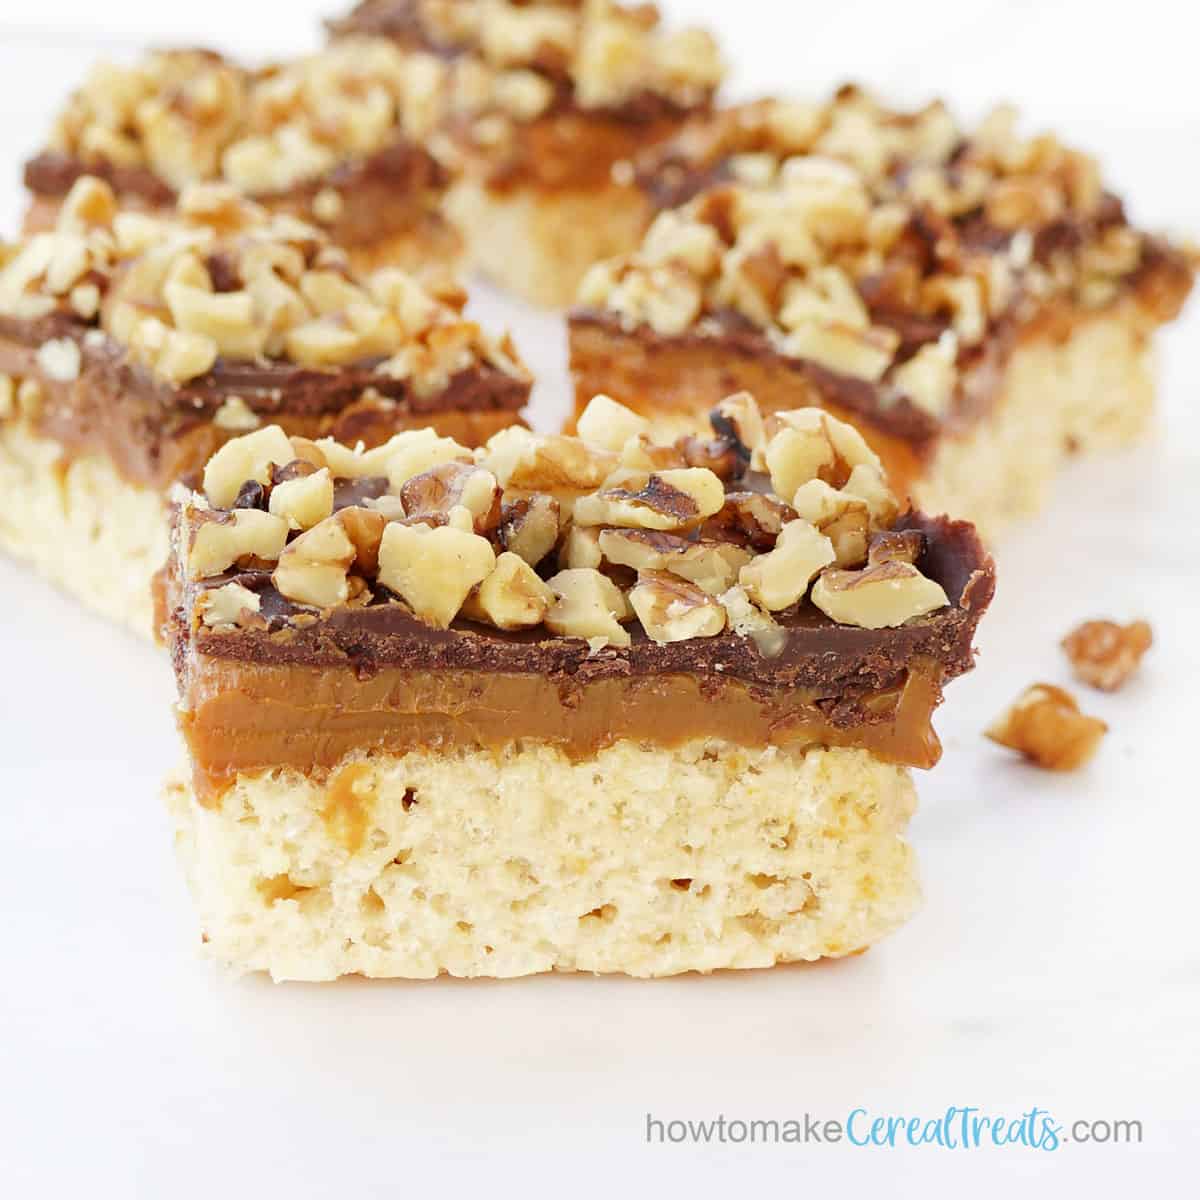 turtle rice crispy treats with chocolate ganache and caramel with pecans or walnuts